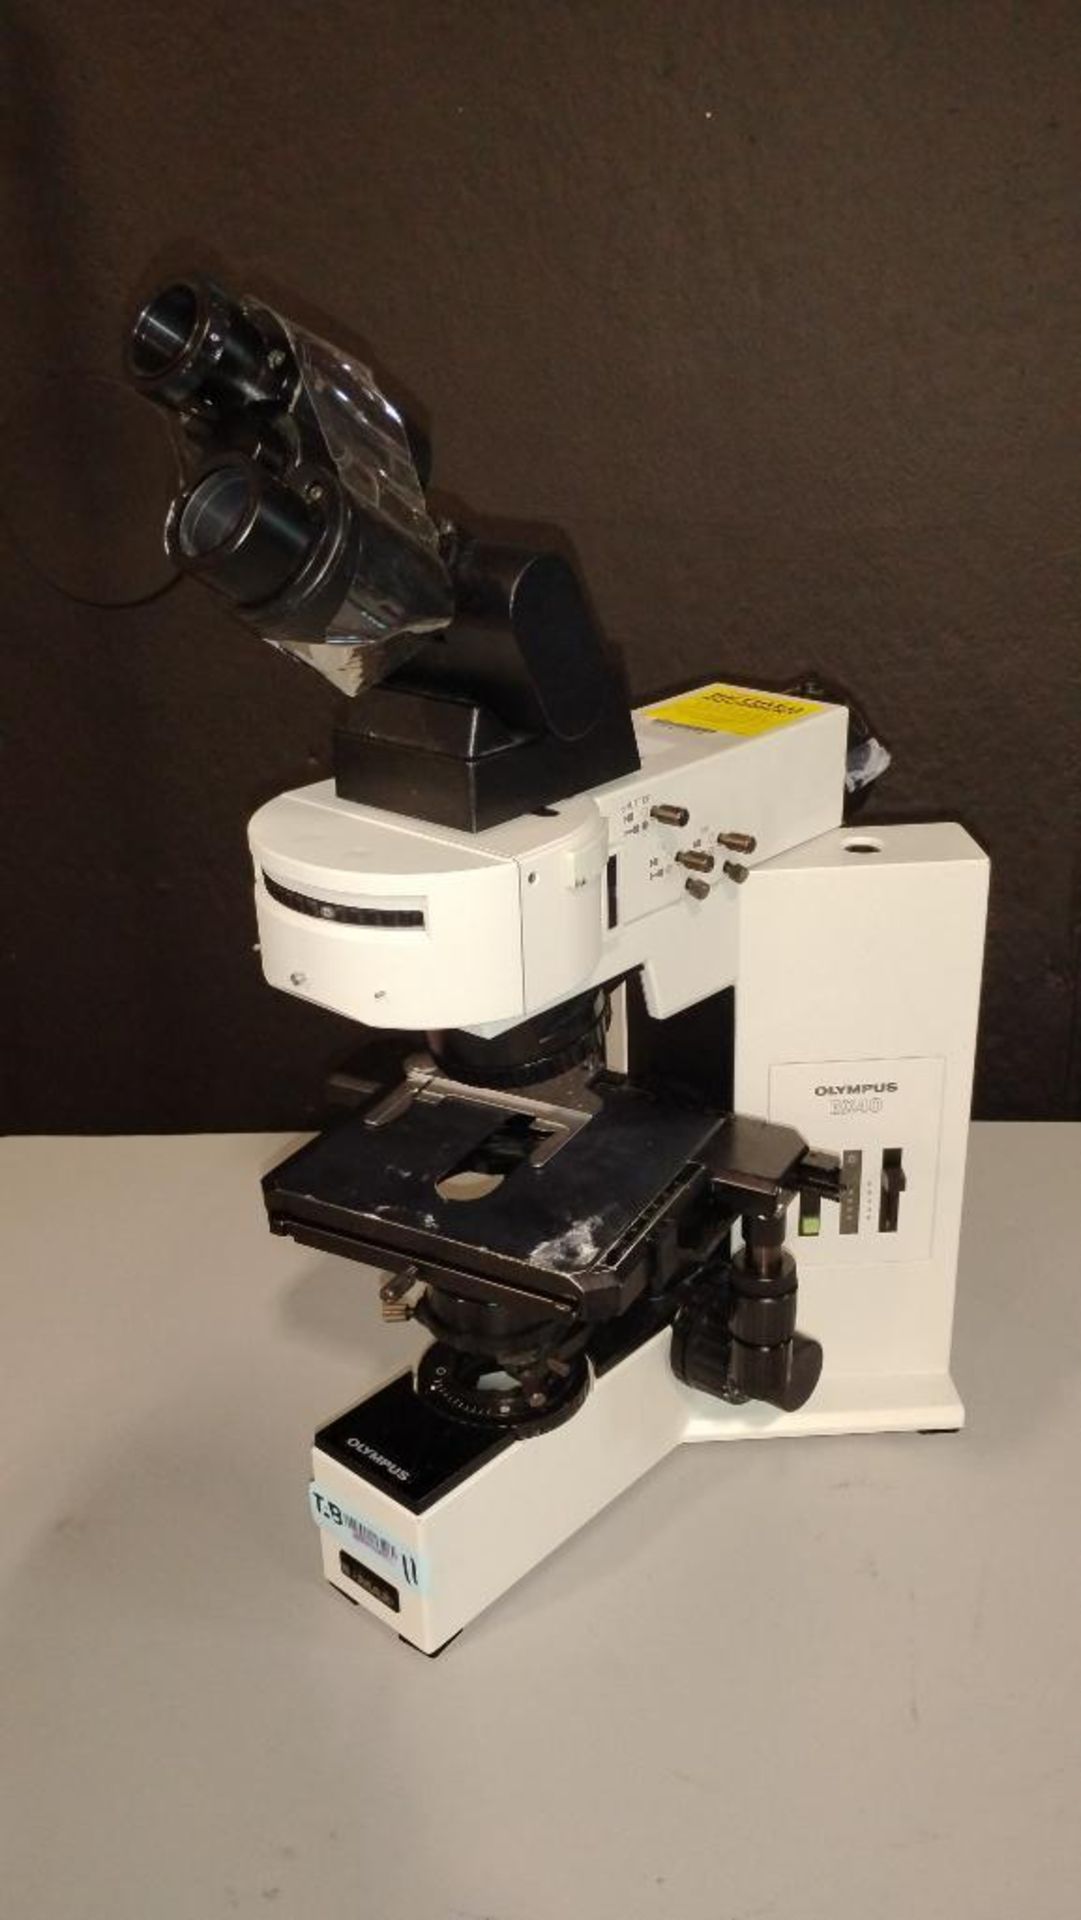 OLYMPUS BX40 LAB MICROSCOPE (NO OBJECTIVES)